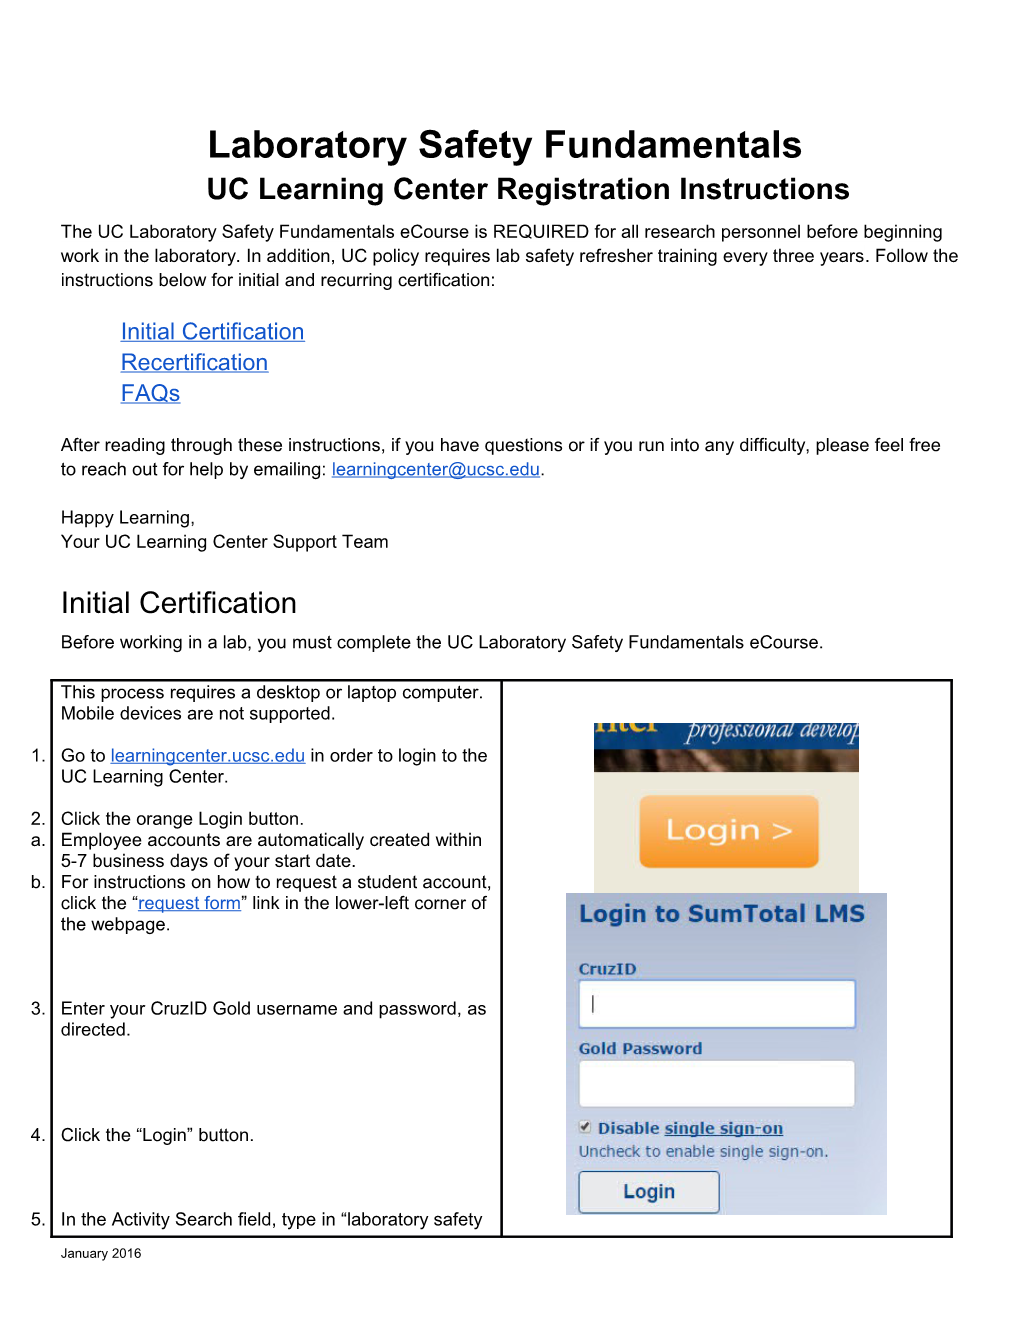 Laboratory Safety Fundamentals UC Learning Center Registration Instructions